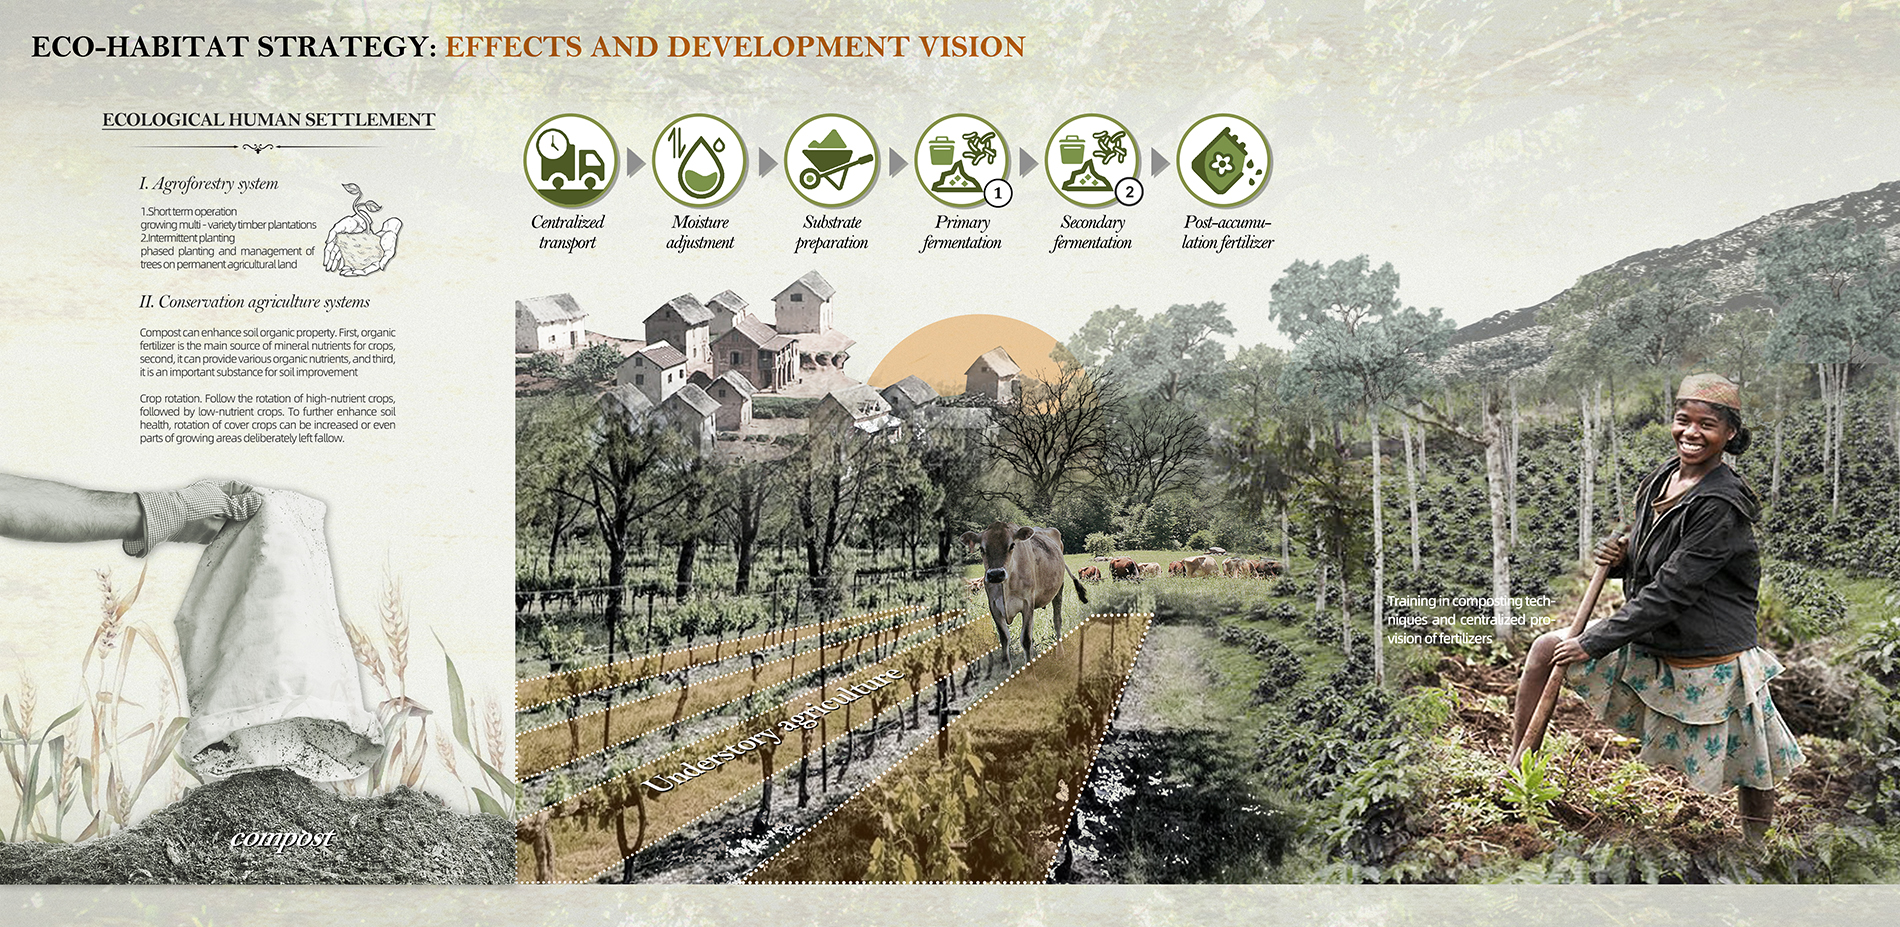 Eco-habitat strategy: Effects and Development Vision